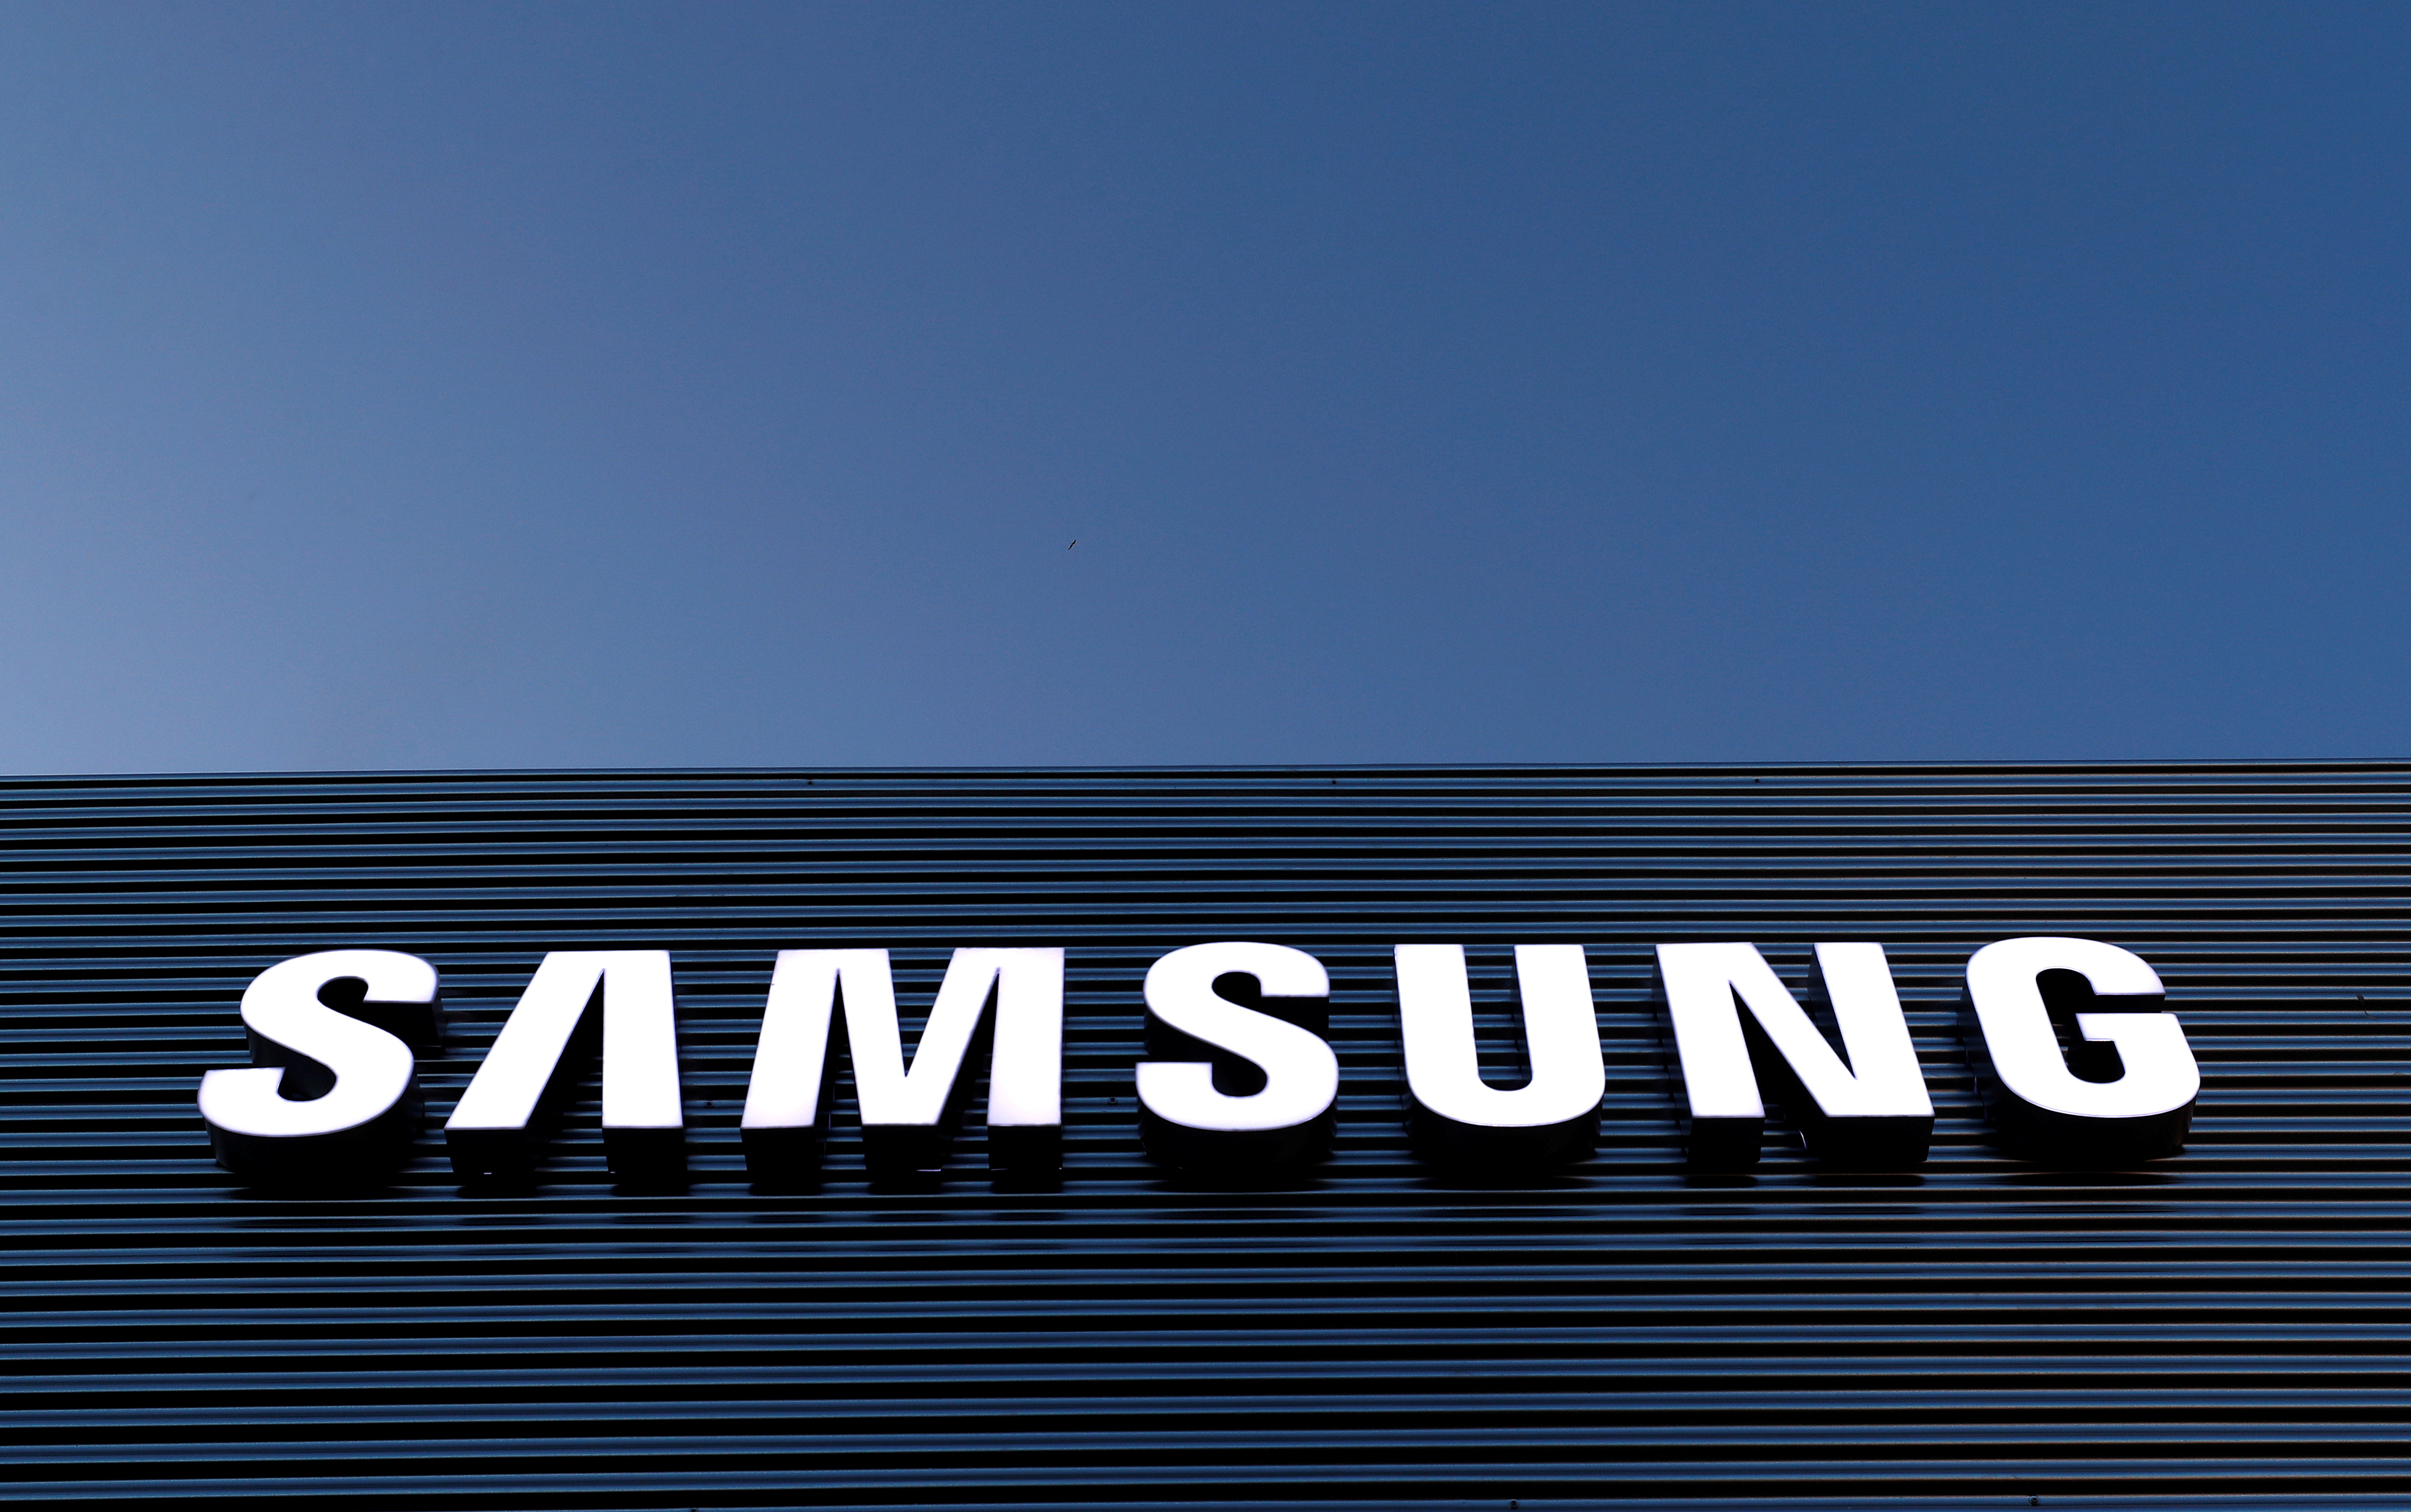 The logo of Samsung is seen on a building during the Mobile World Congress in Barcelona, Spain February 25, 2018. REUTERS/Yves Herman